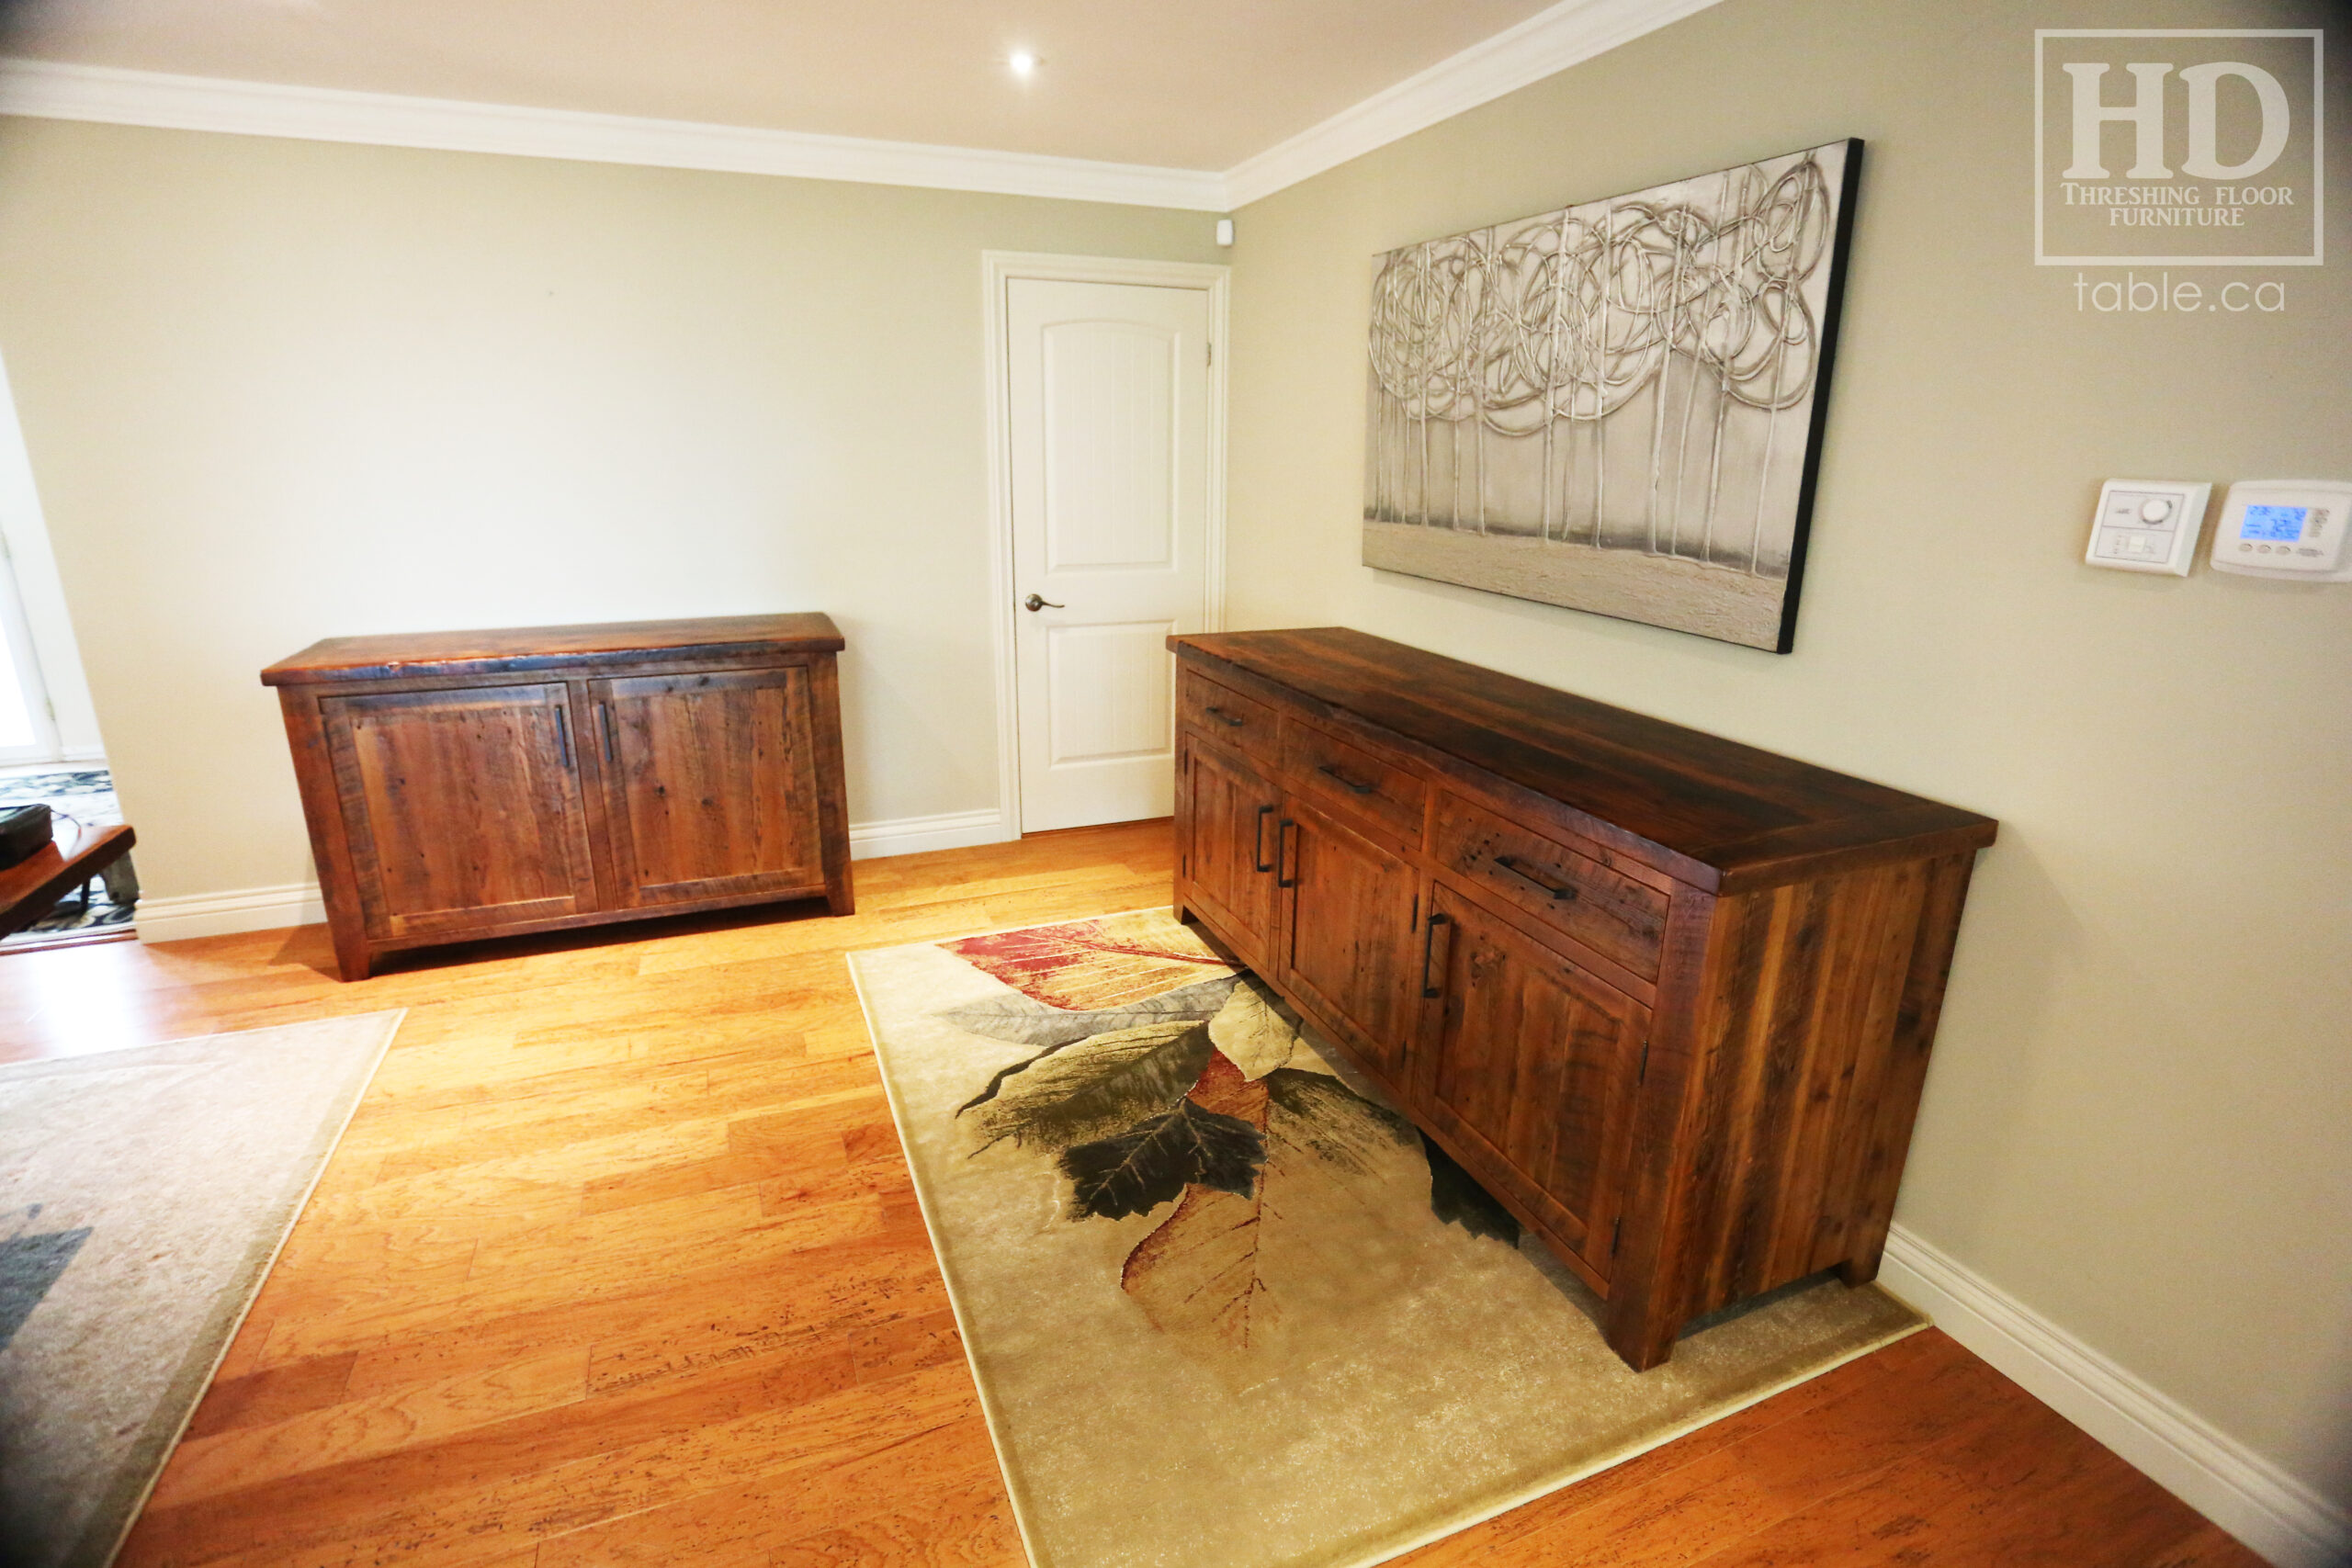 60" Reclaimed Ontario Barnwood Buffet we made for a Morpeth Home - 22" deep - 36" height – 2 Doors - Reclaimed Hemlock Threshing Floor & Grainery Board Construction - Original edges & distressing maintained - Lee Valley Hardware - Premium epoxy + satin polyurethane finish - www.table.ca